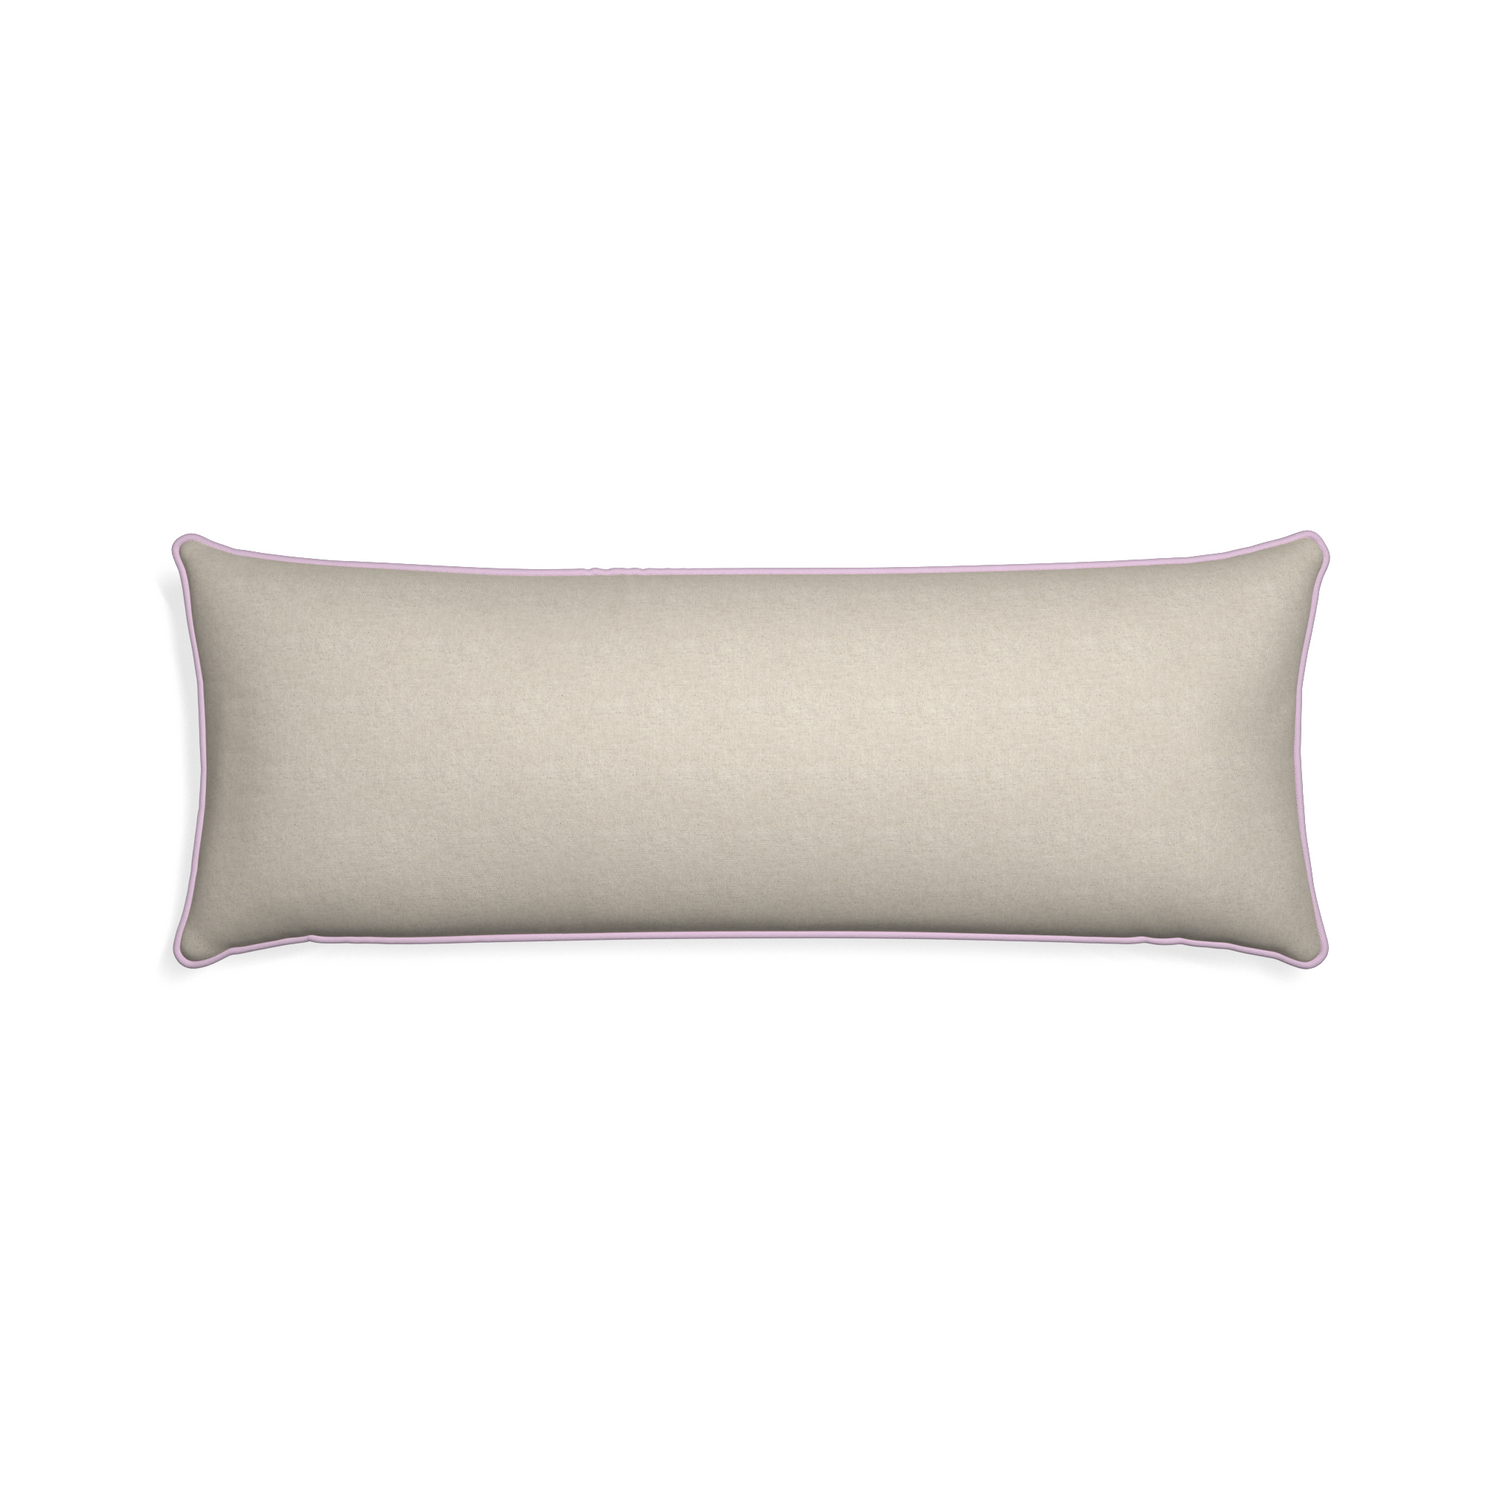 Xl-lumbar oat custom pillow with l piping on white background